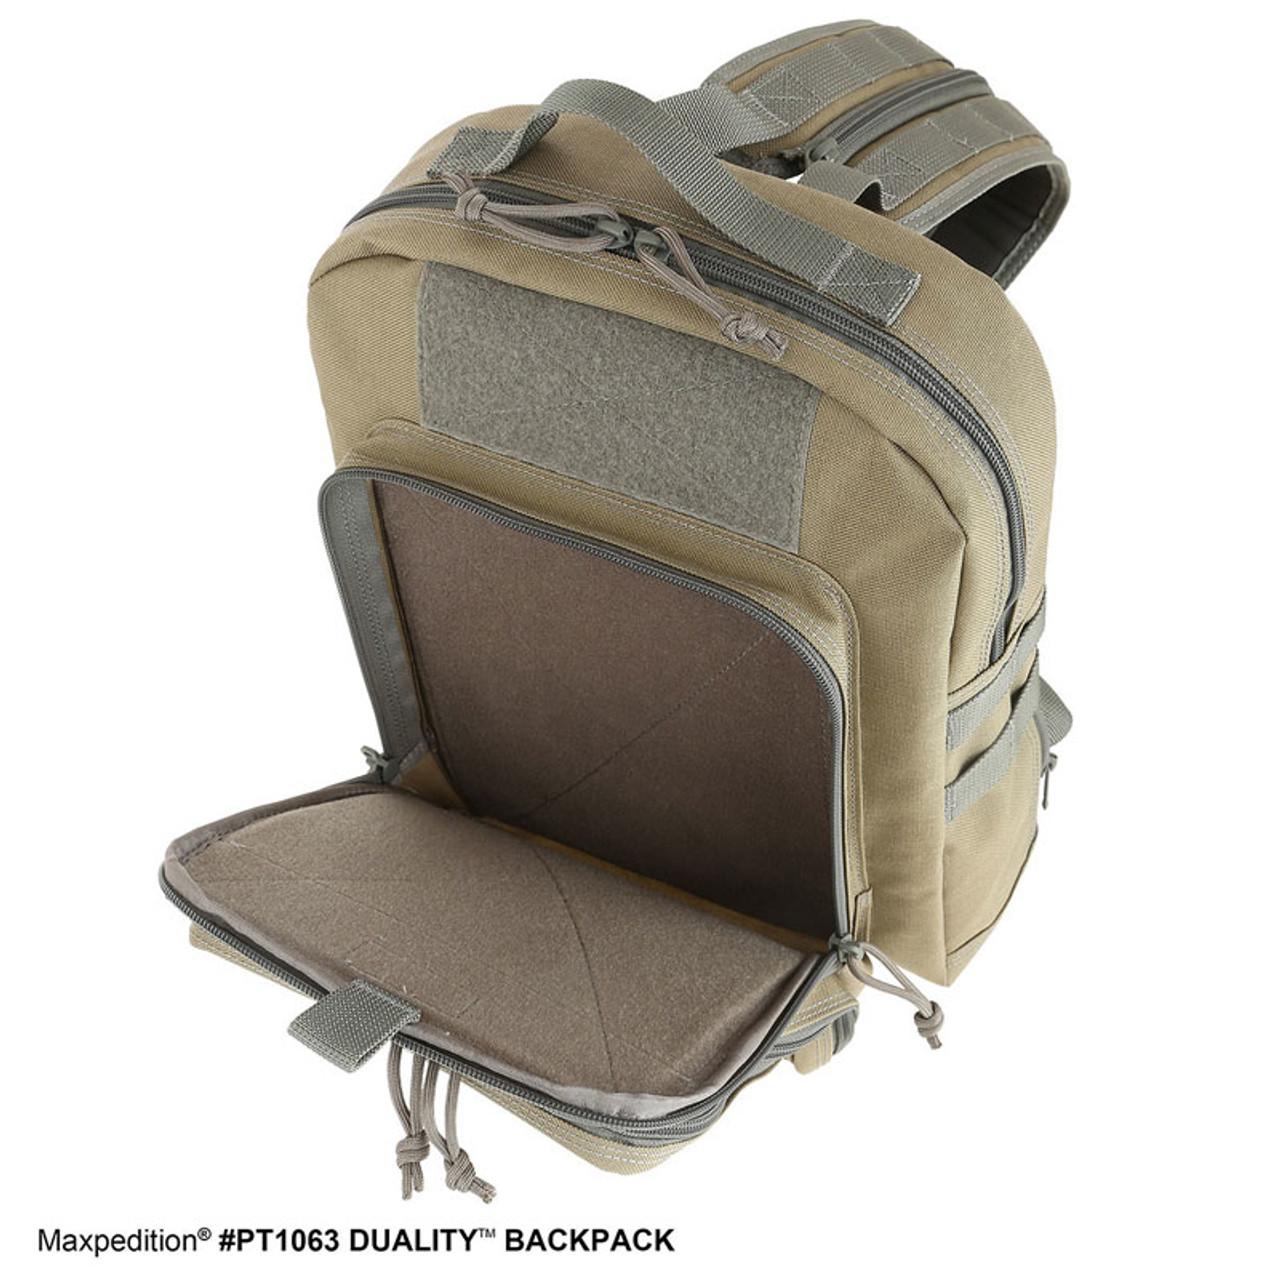 Maxpedition Duality Backpack